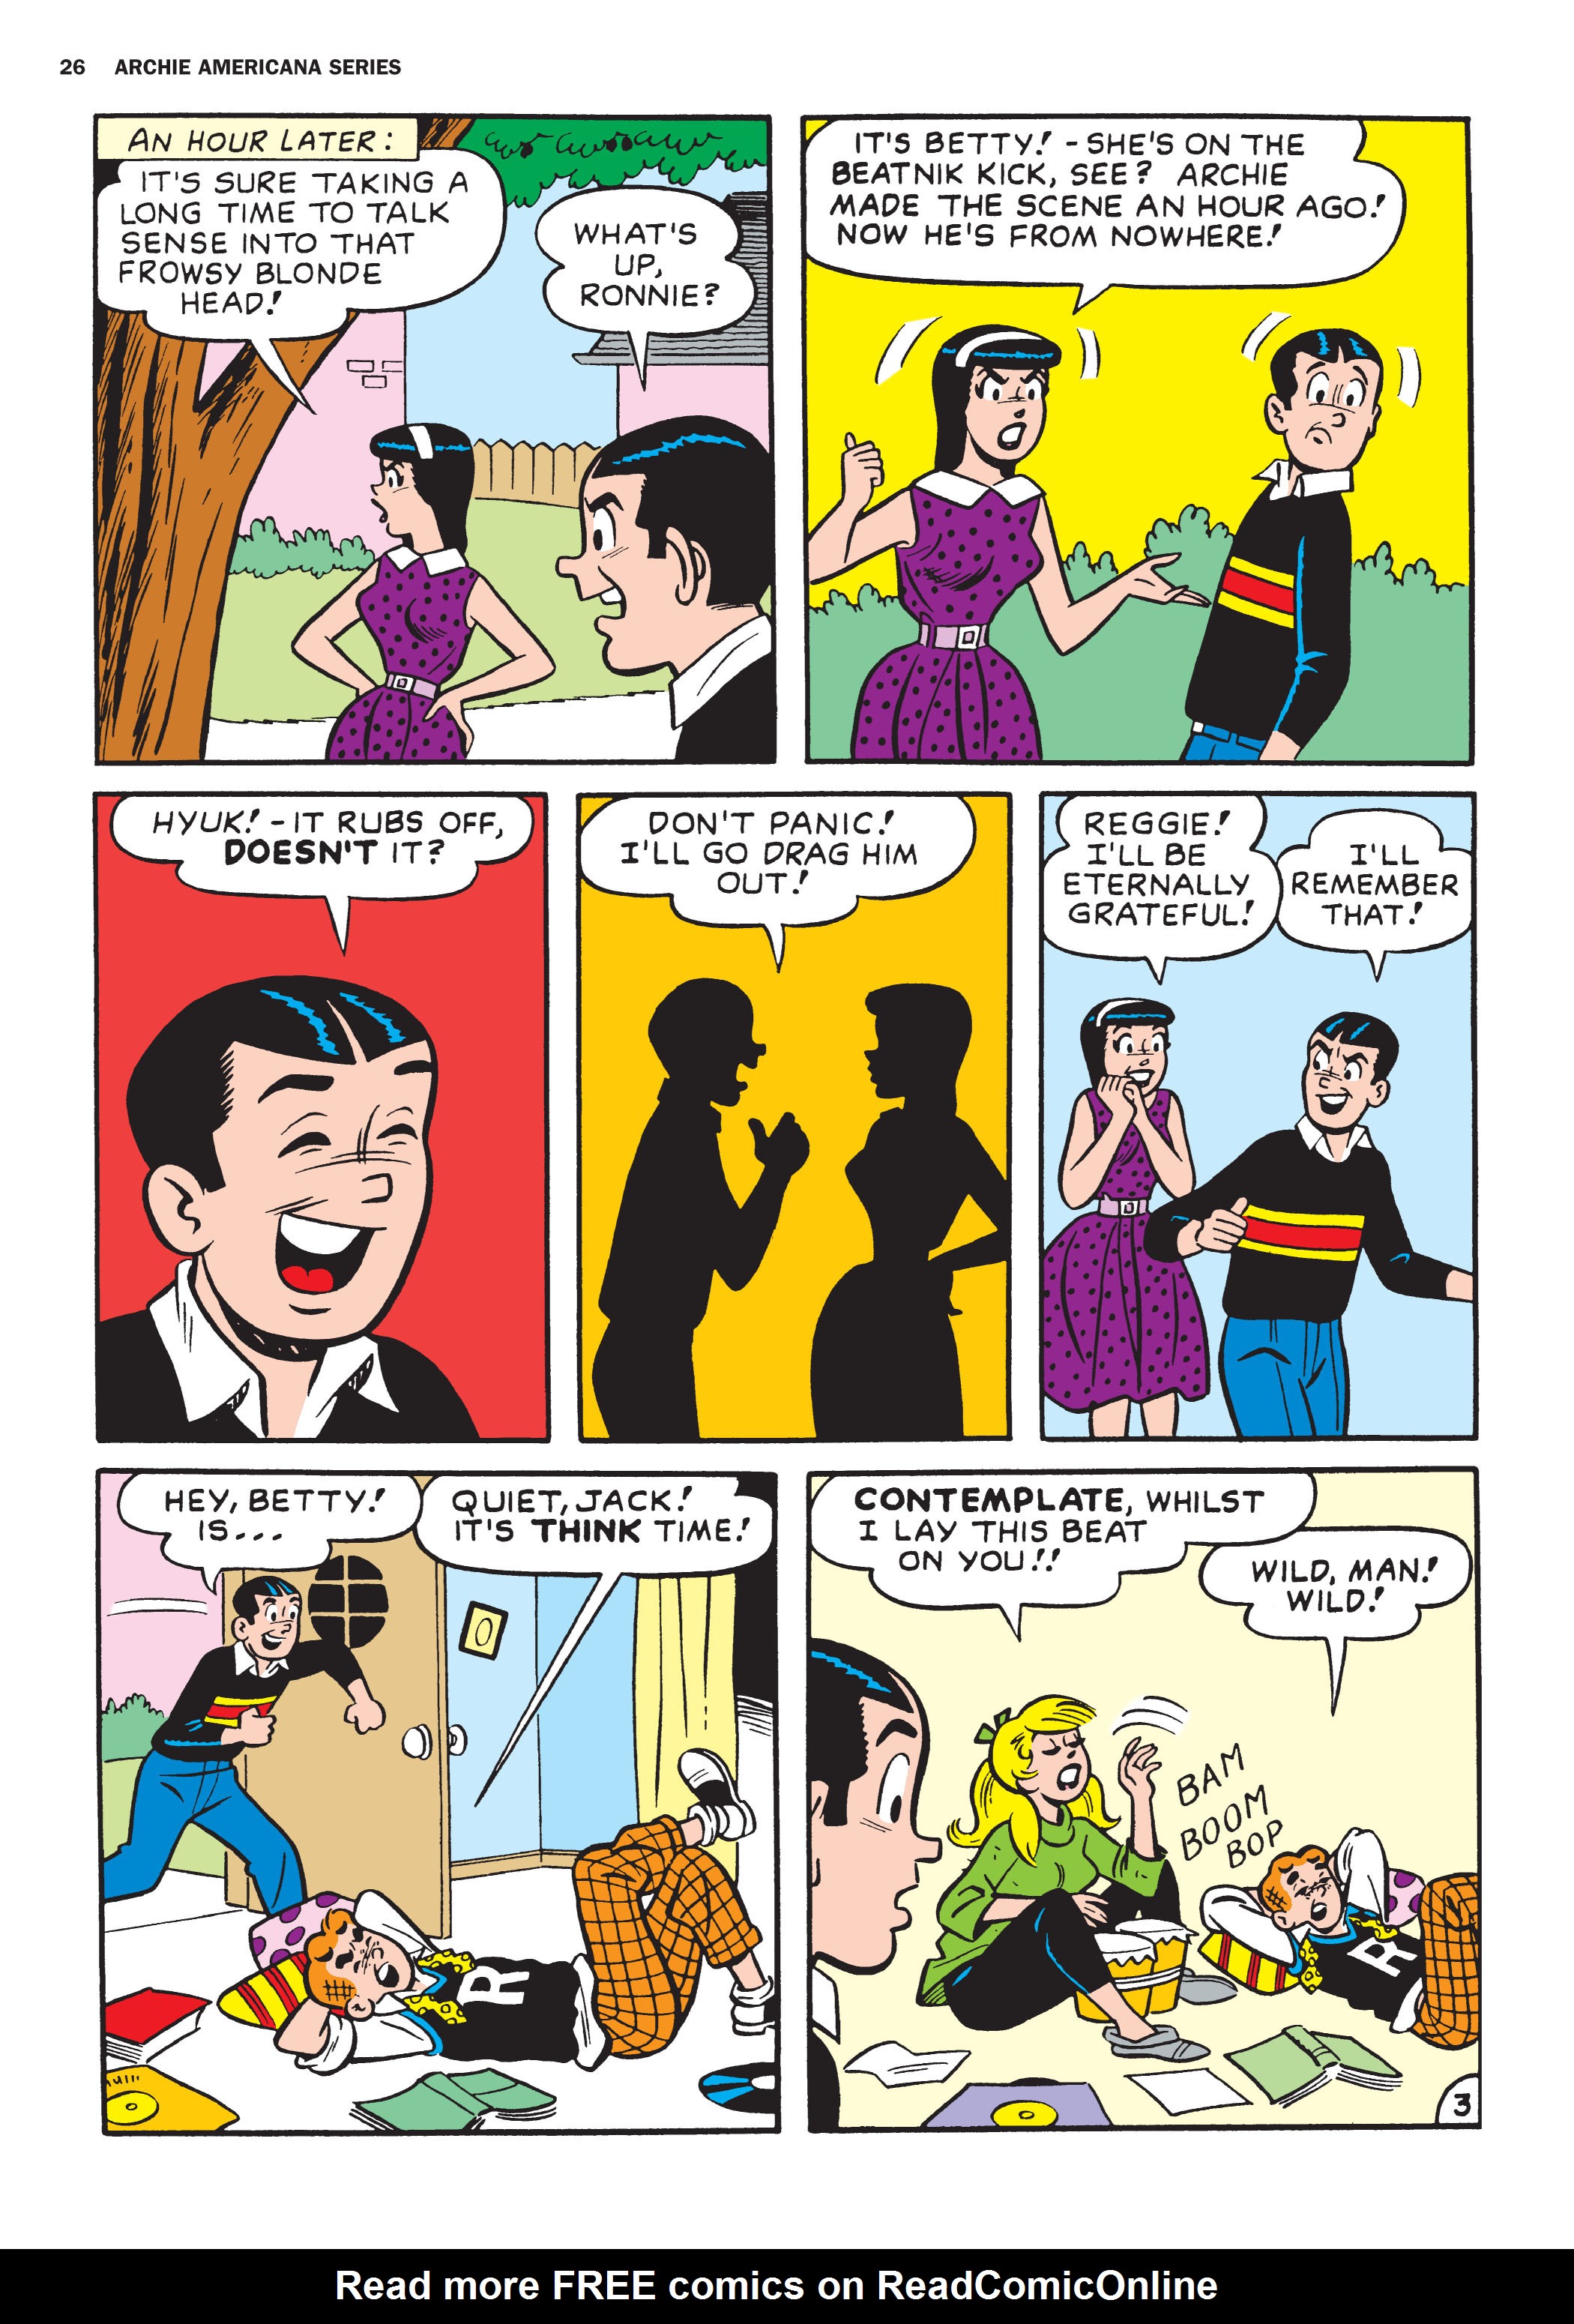 Read online Archie Americana Series comic -  Issue # TPB 8 - 27